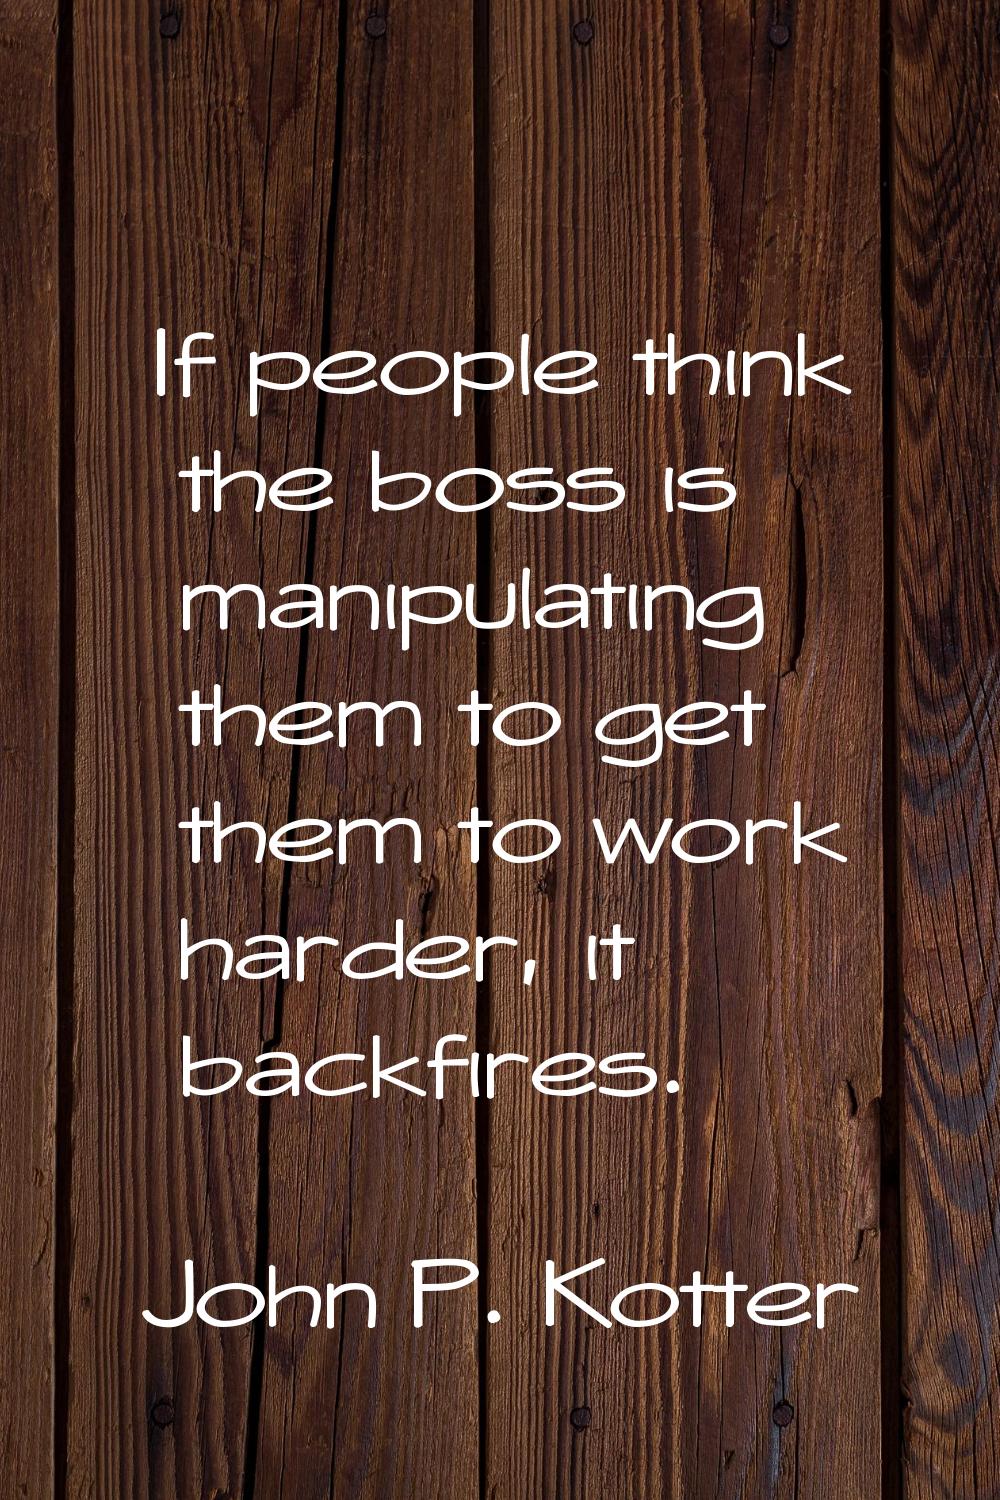 If people think the boss is manipulating them to get them to work harder, it backfires.